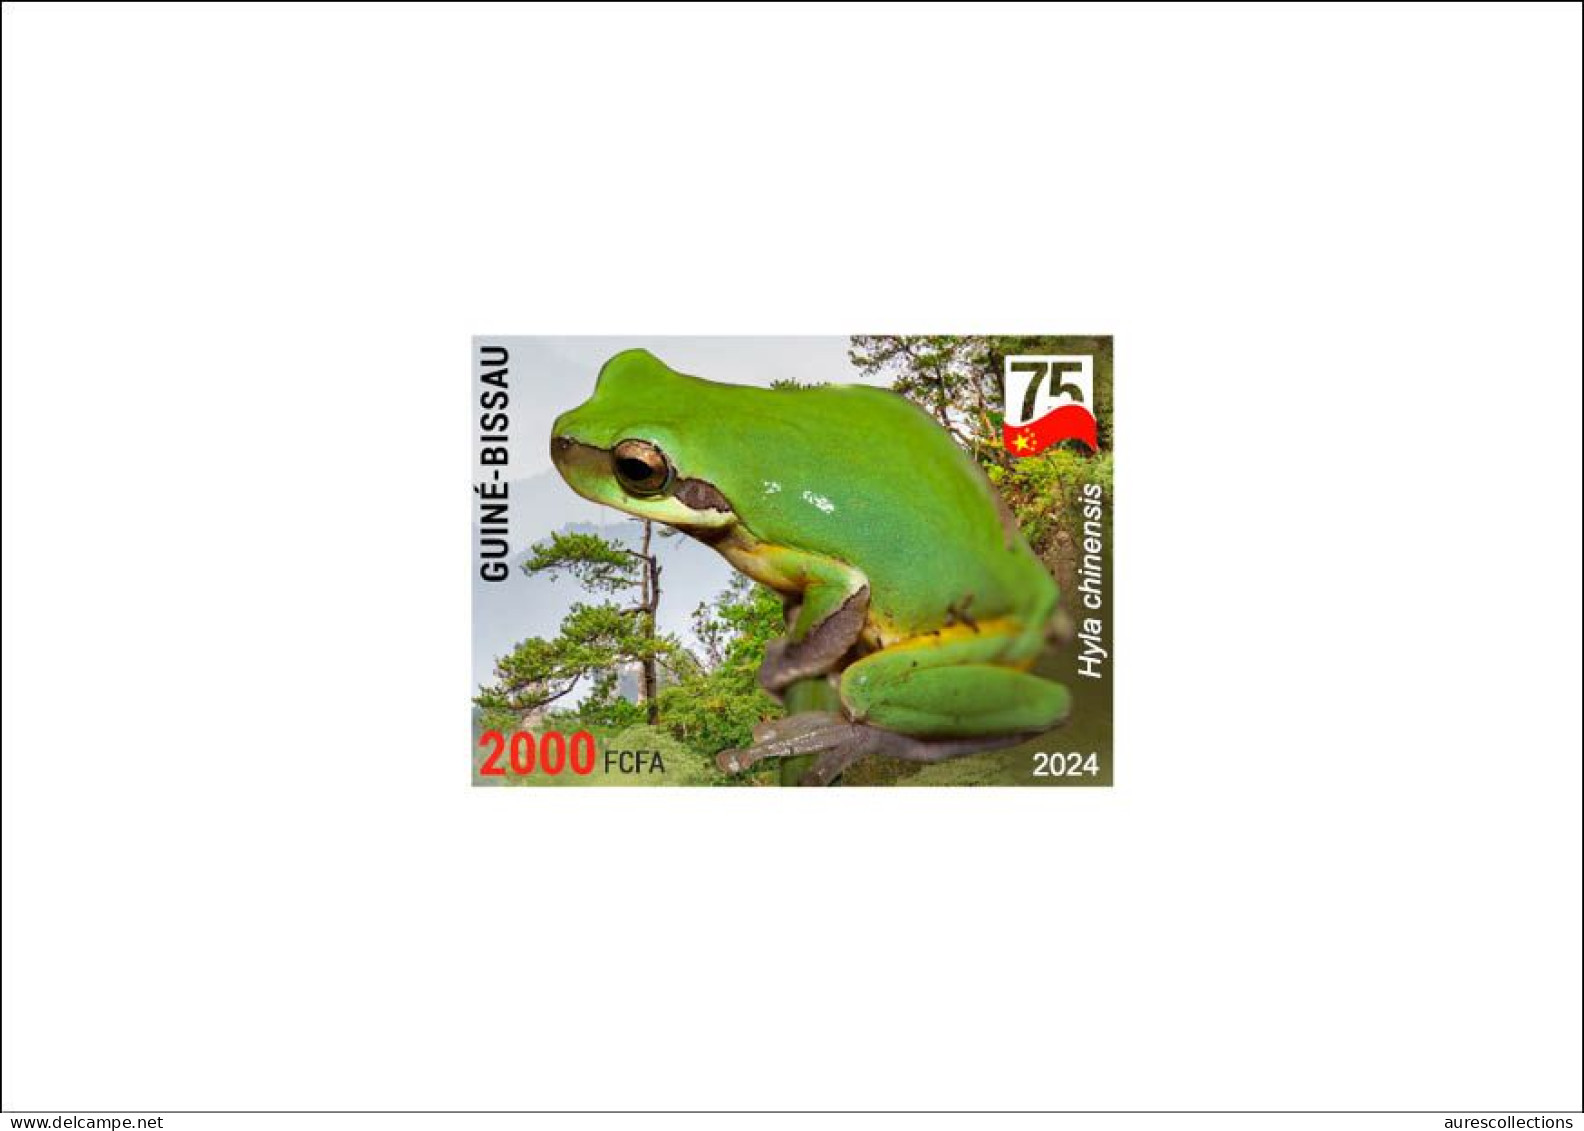 GUINEA BISSAU 2024 DELUXE PROOF - CHINA AMPHIBIANS & REPTILES - CHINESE TREE FROG FROGS GRENOUILLES - CHINA 75 ANNIV. - Rane